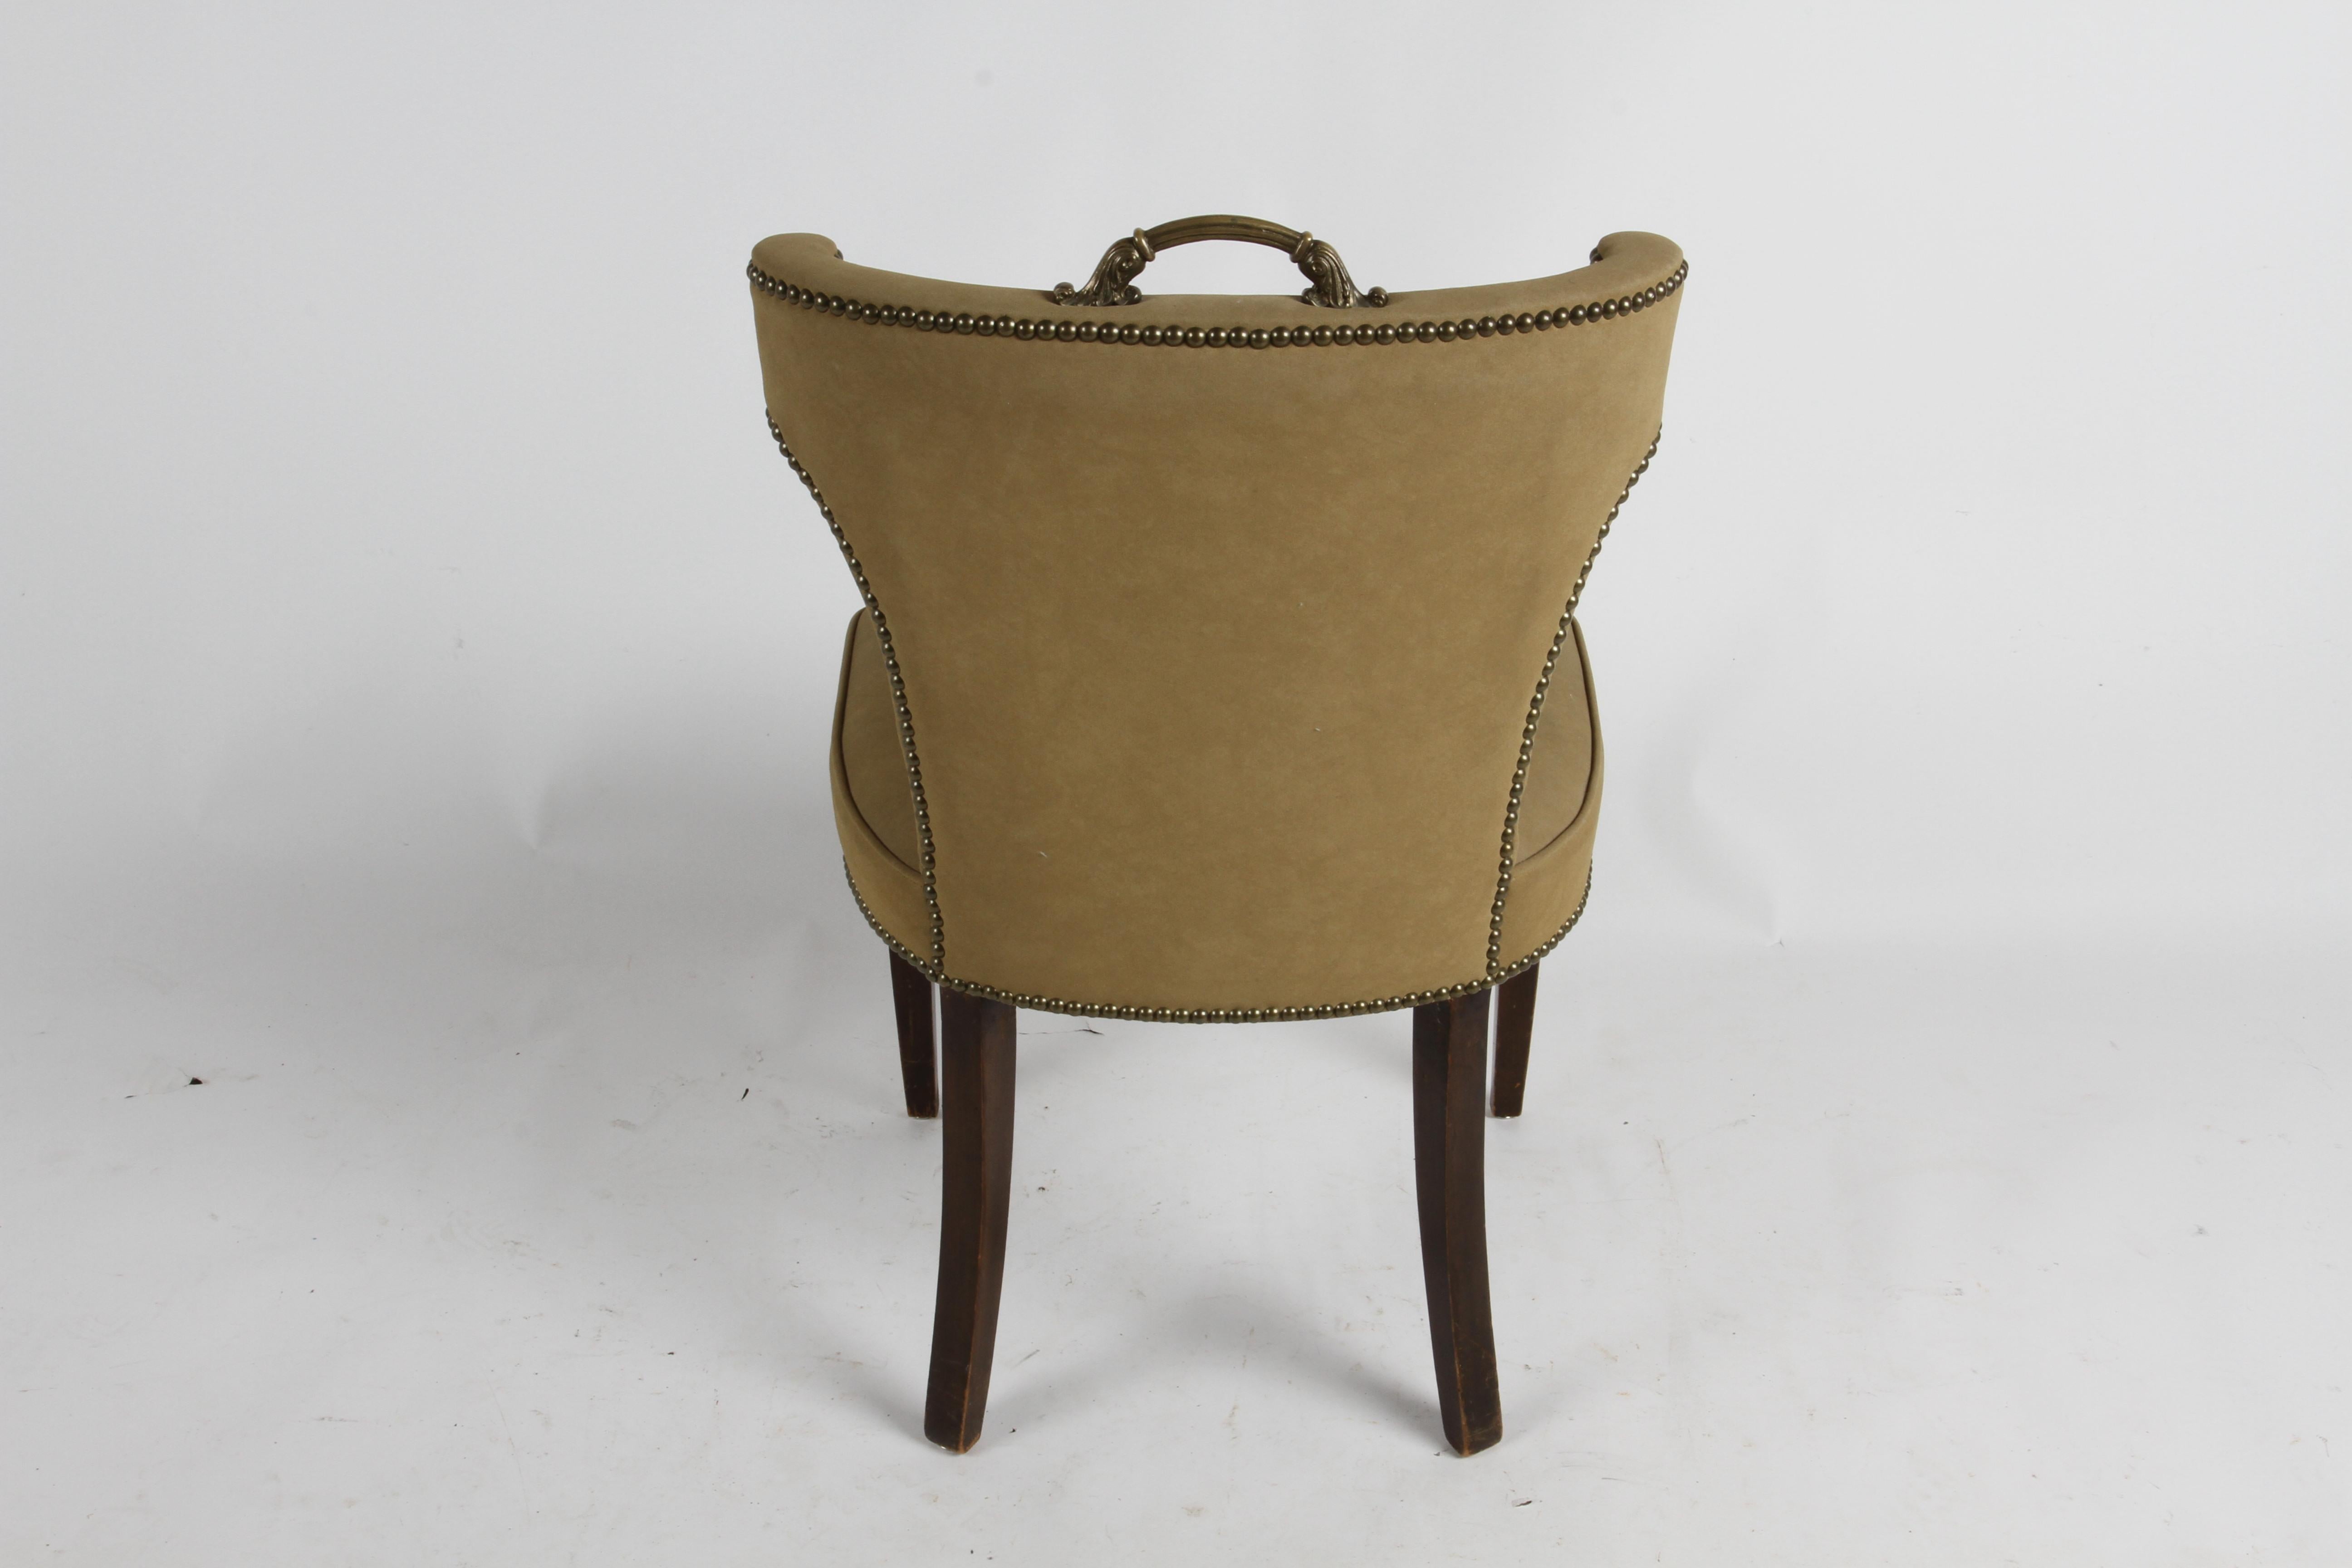 1940s Hollywood Regency Tan Suede Desk Chair with Brass Handle & Nailhead Trim For Sale 3